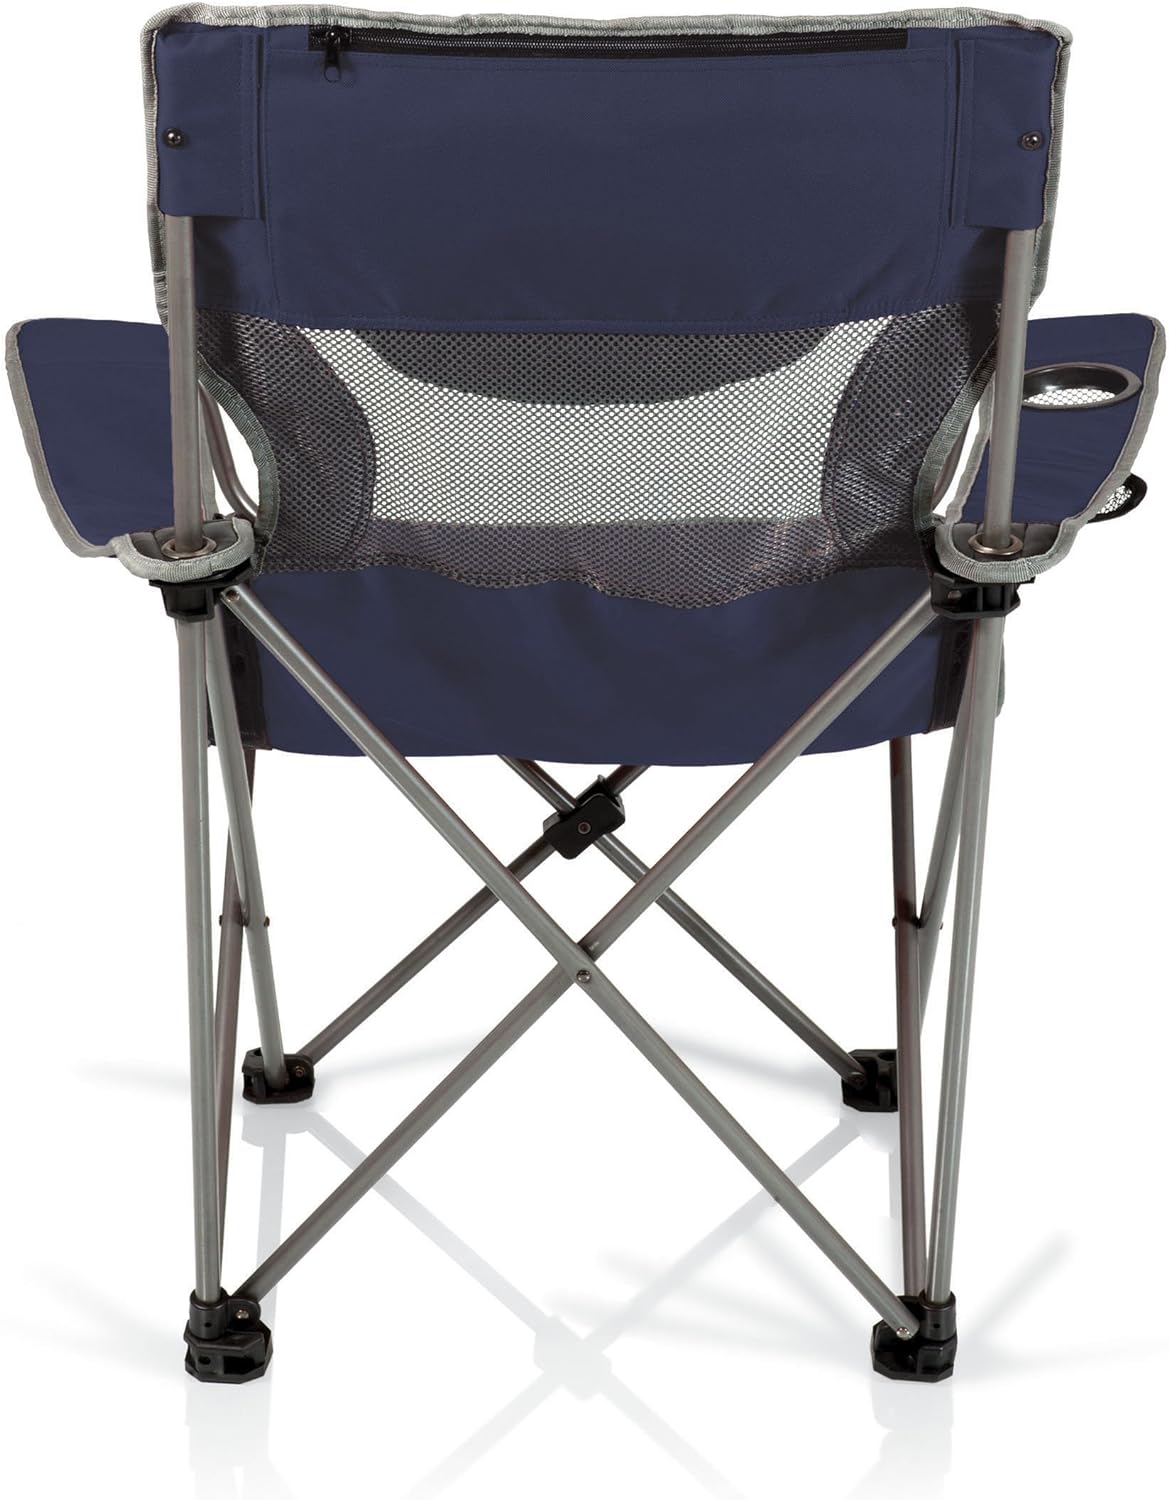 ONIVA - a Picnic Time brand Campsite Camping Chair, Picnic Chair, Outdoor Folding Chair with Carry Bag, Beach Chair